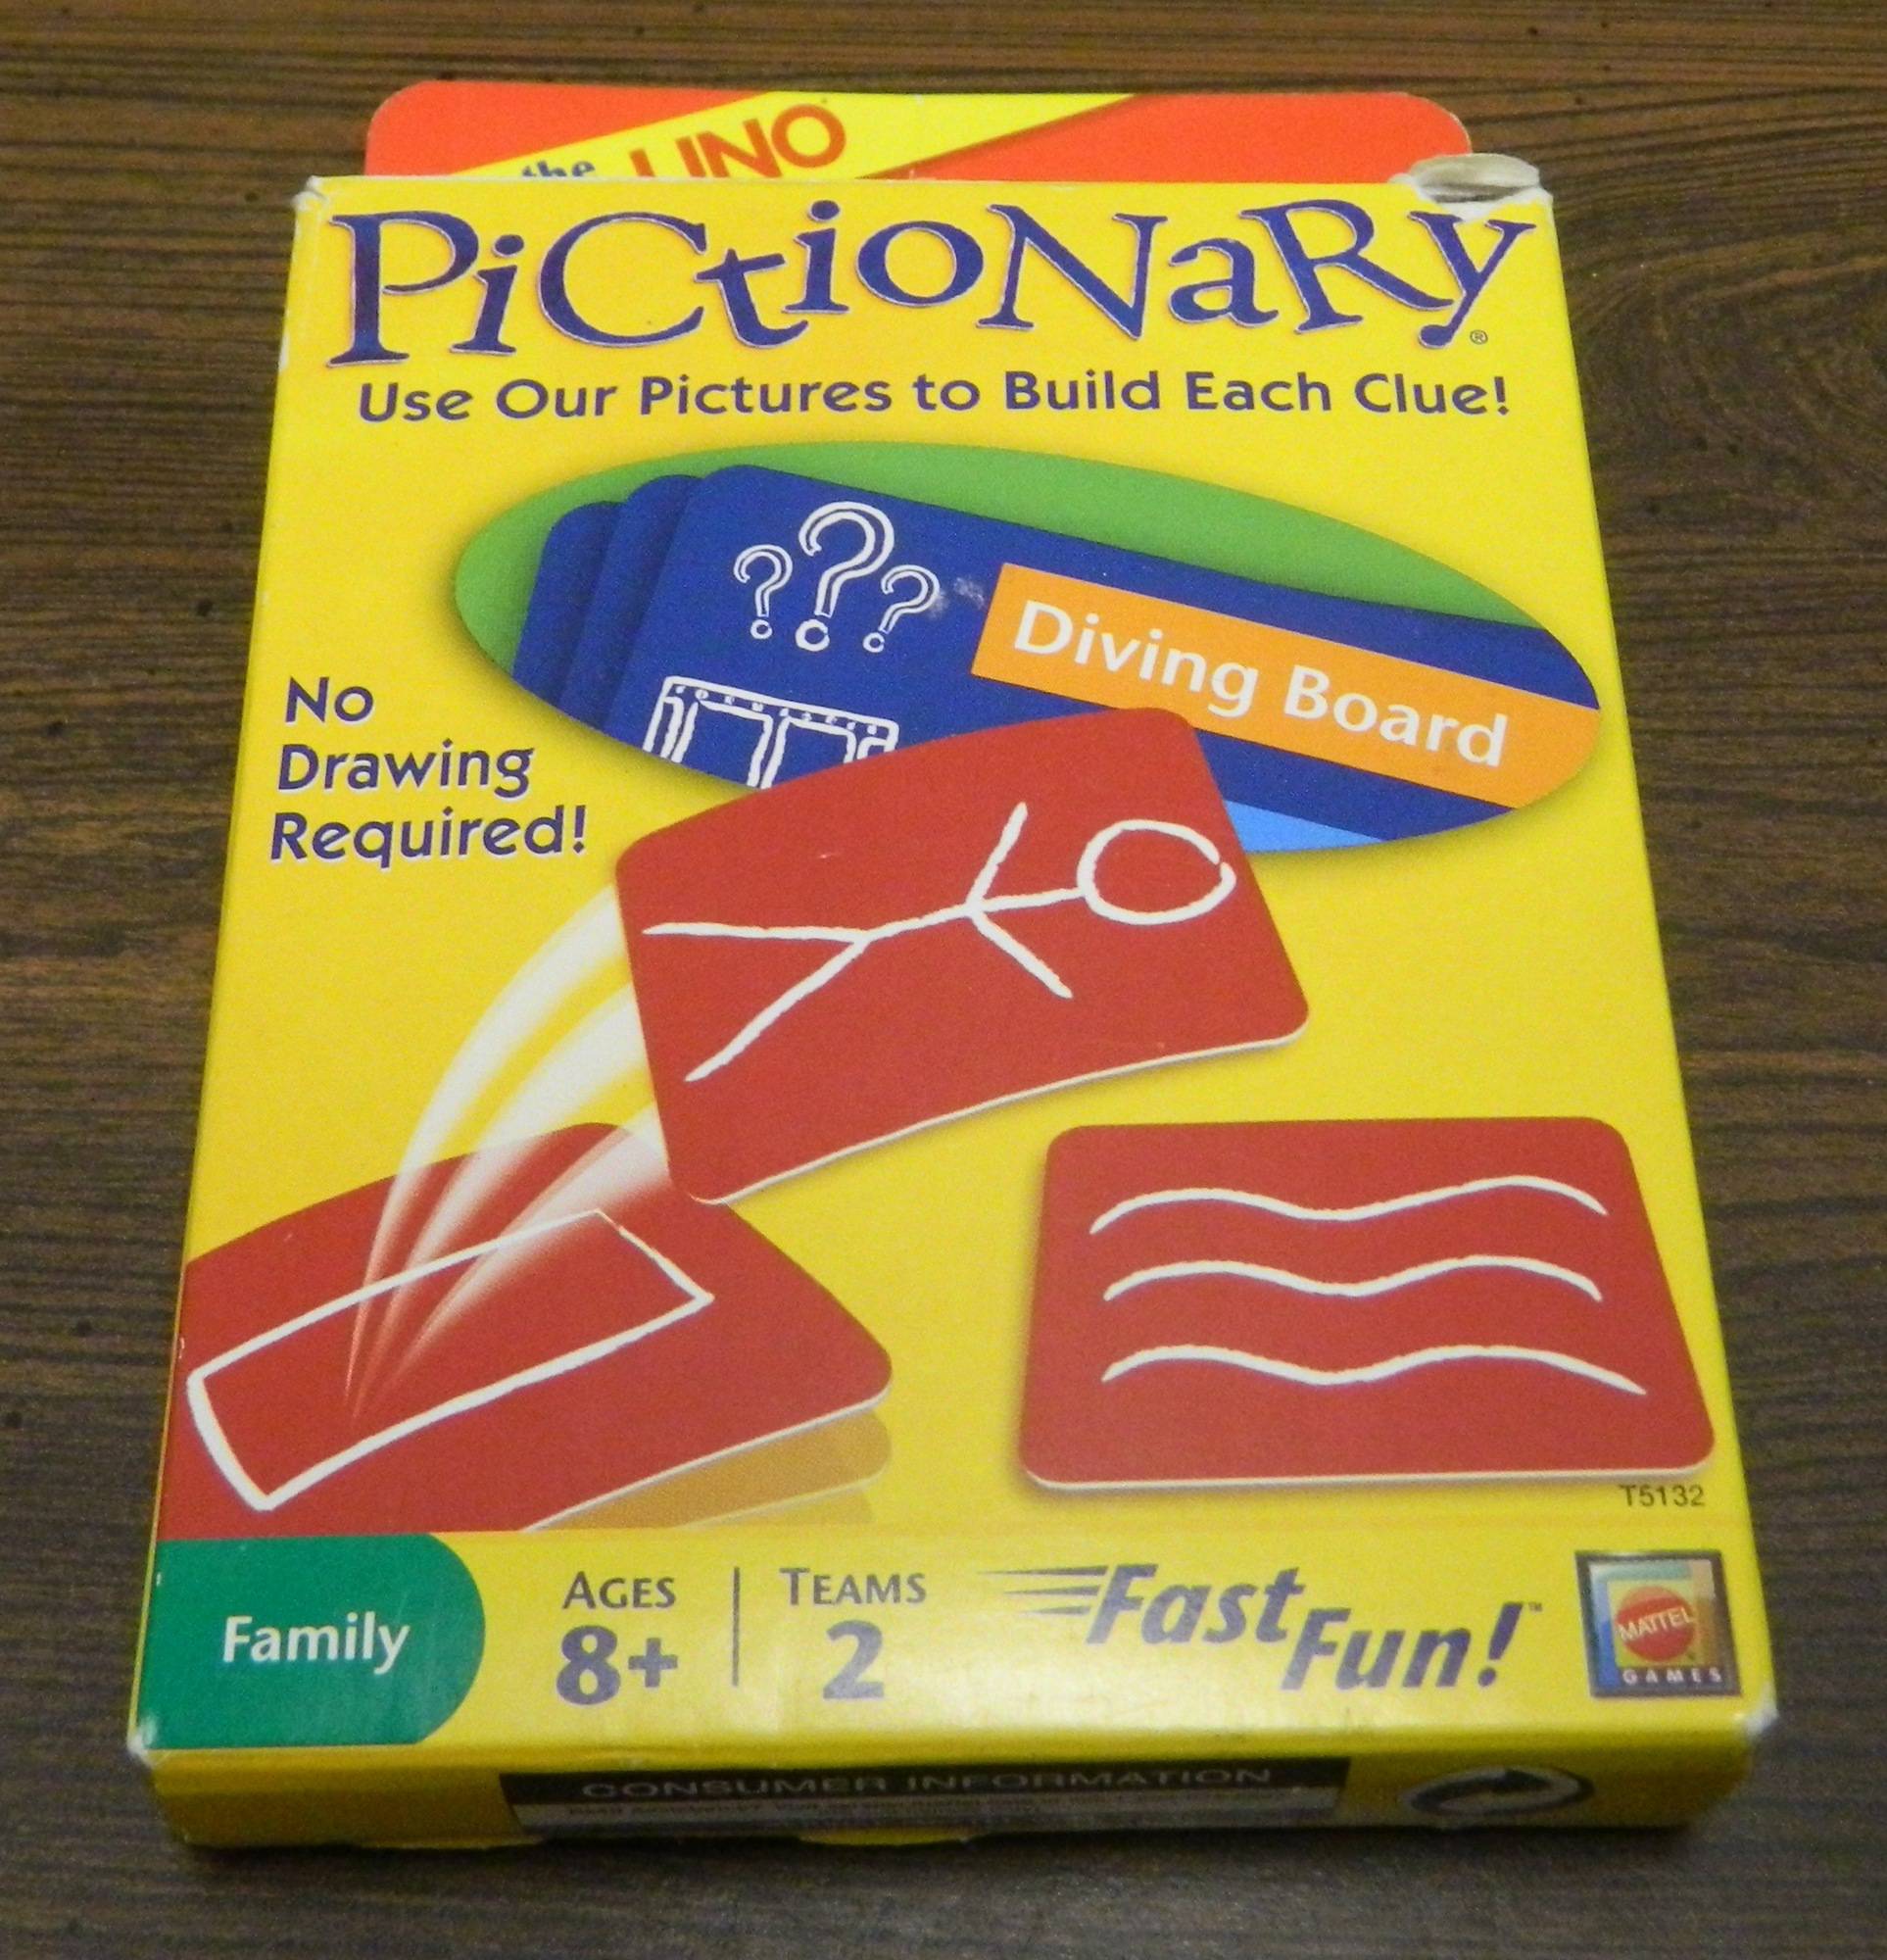 Pictionary Card Game Review and Rules - Geeky Hobbies